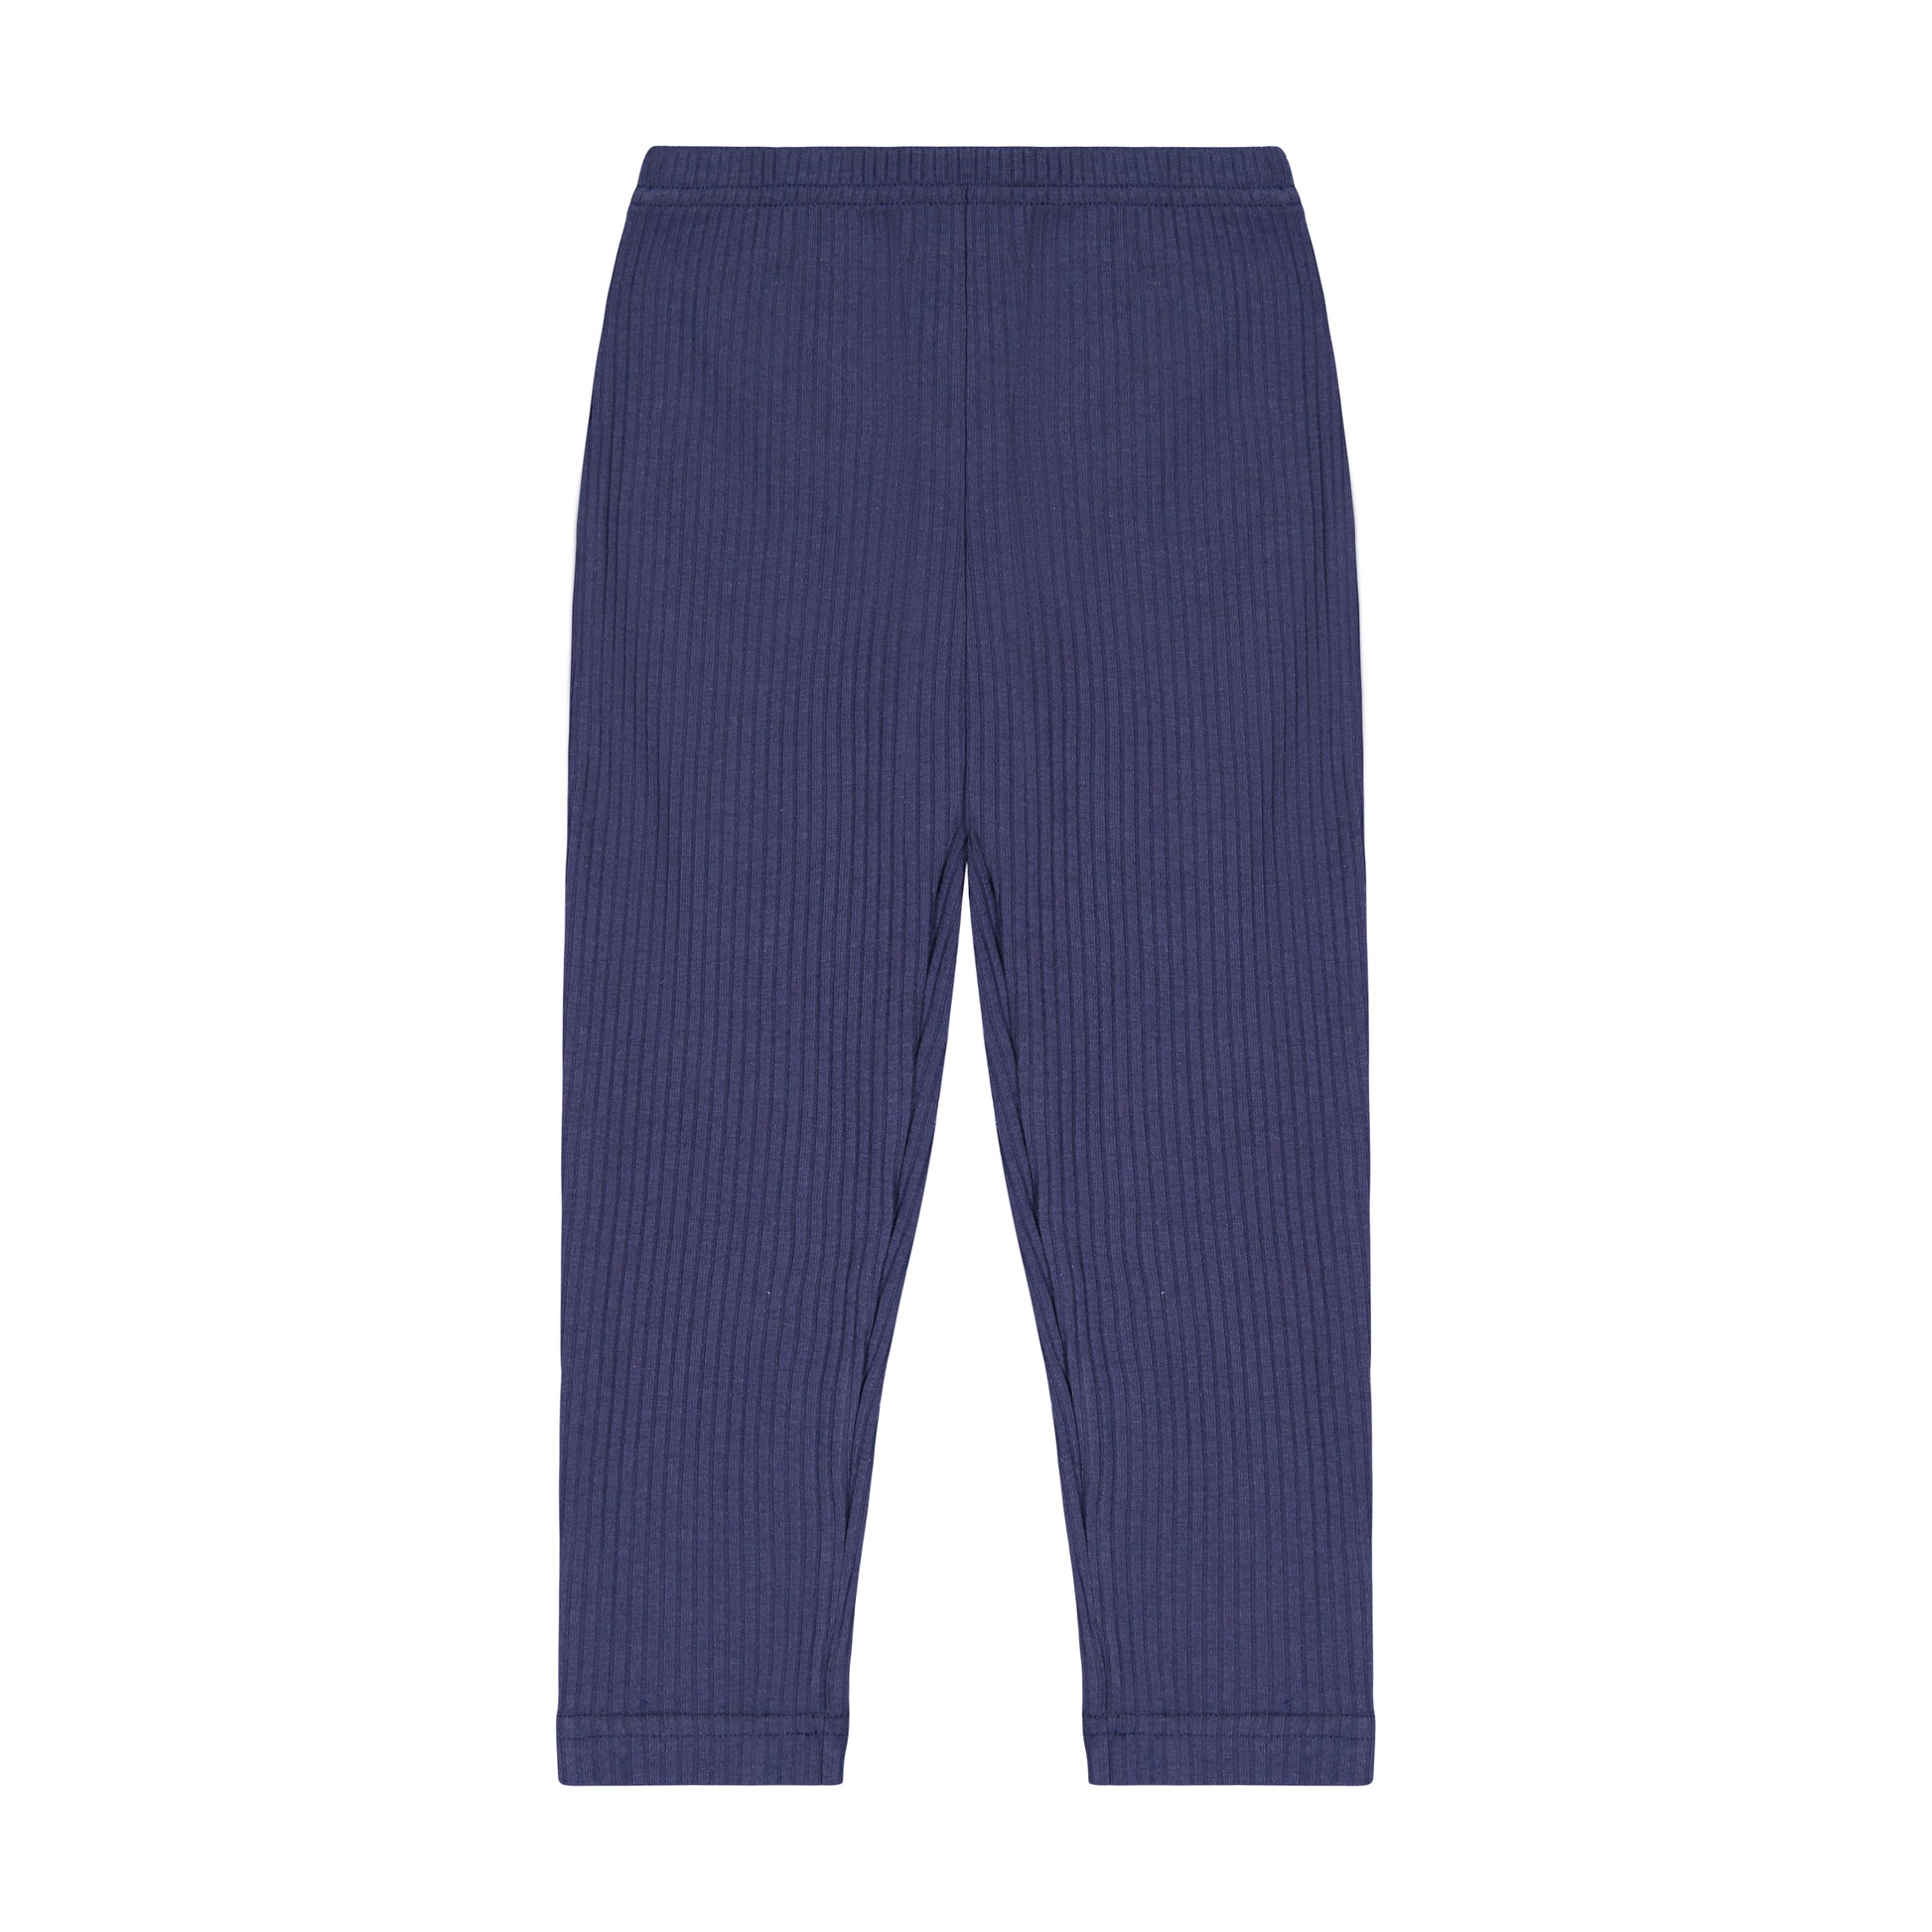 Leggings Navy Ribbed Knit – Busy Bees